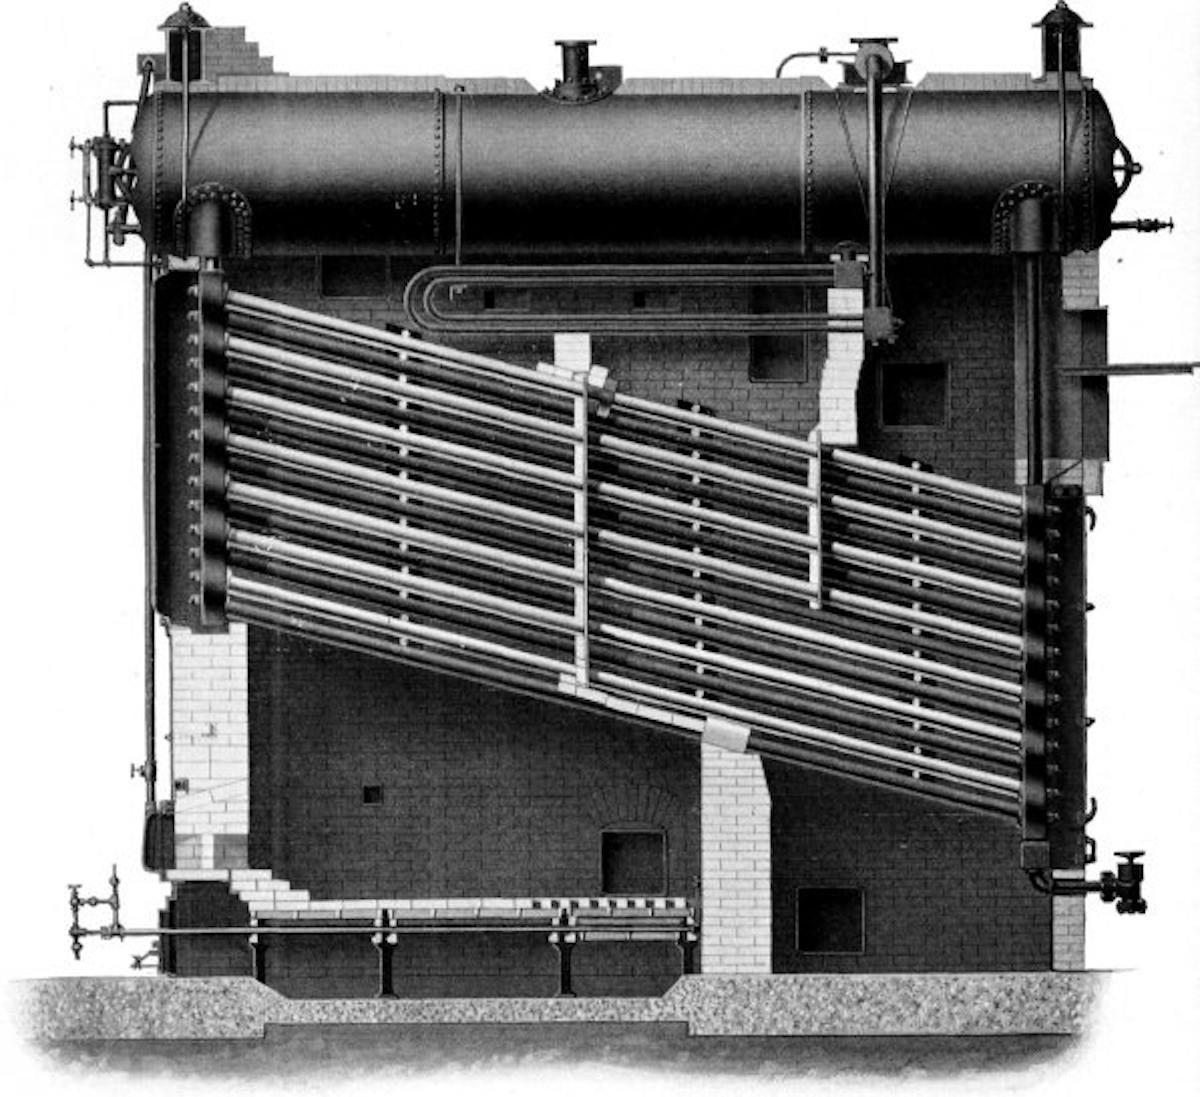 Fig. 29. Babcock & Wilcox Boiler, Equipped with a Peabody Oil Furnace